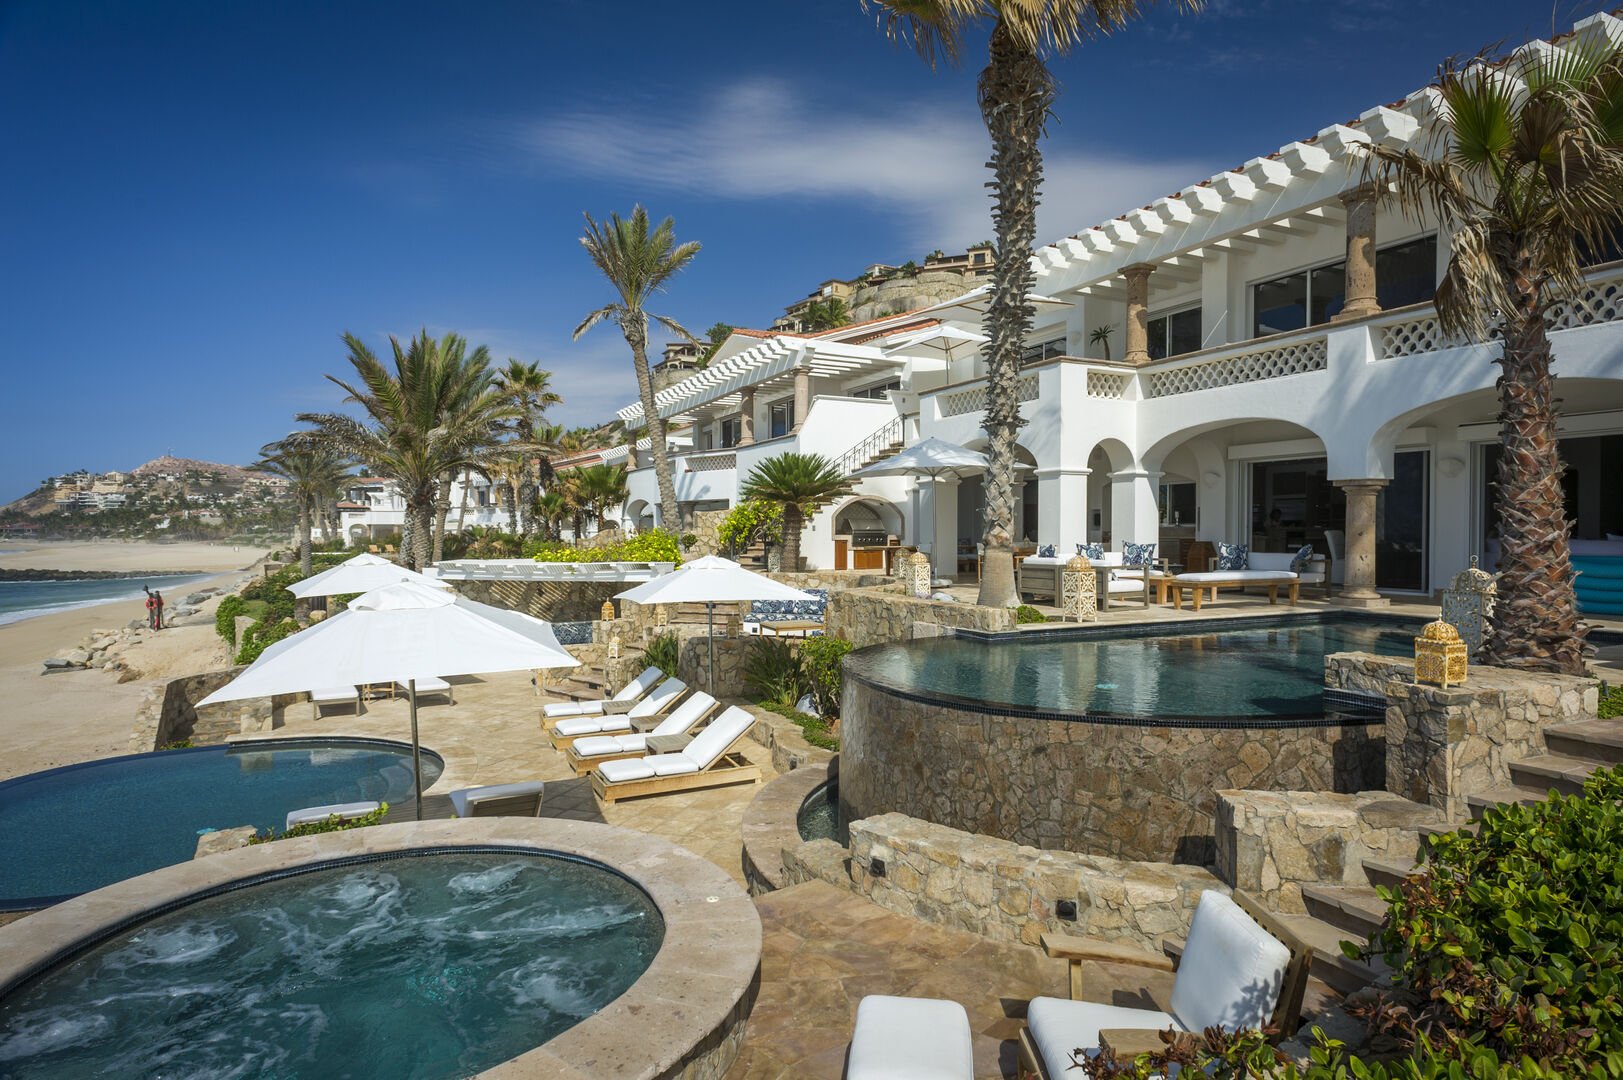 View of our Los Cabos villa and the pool